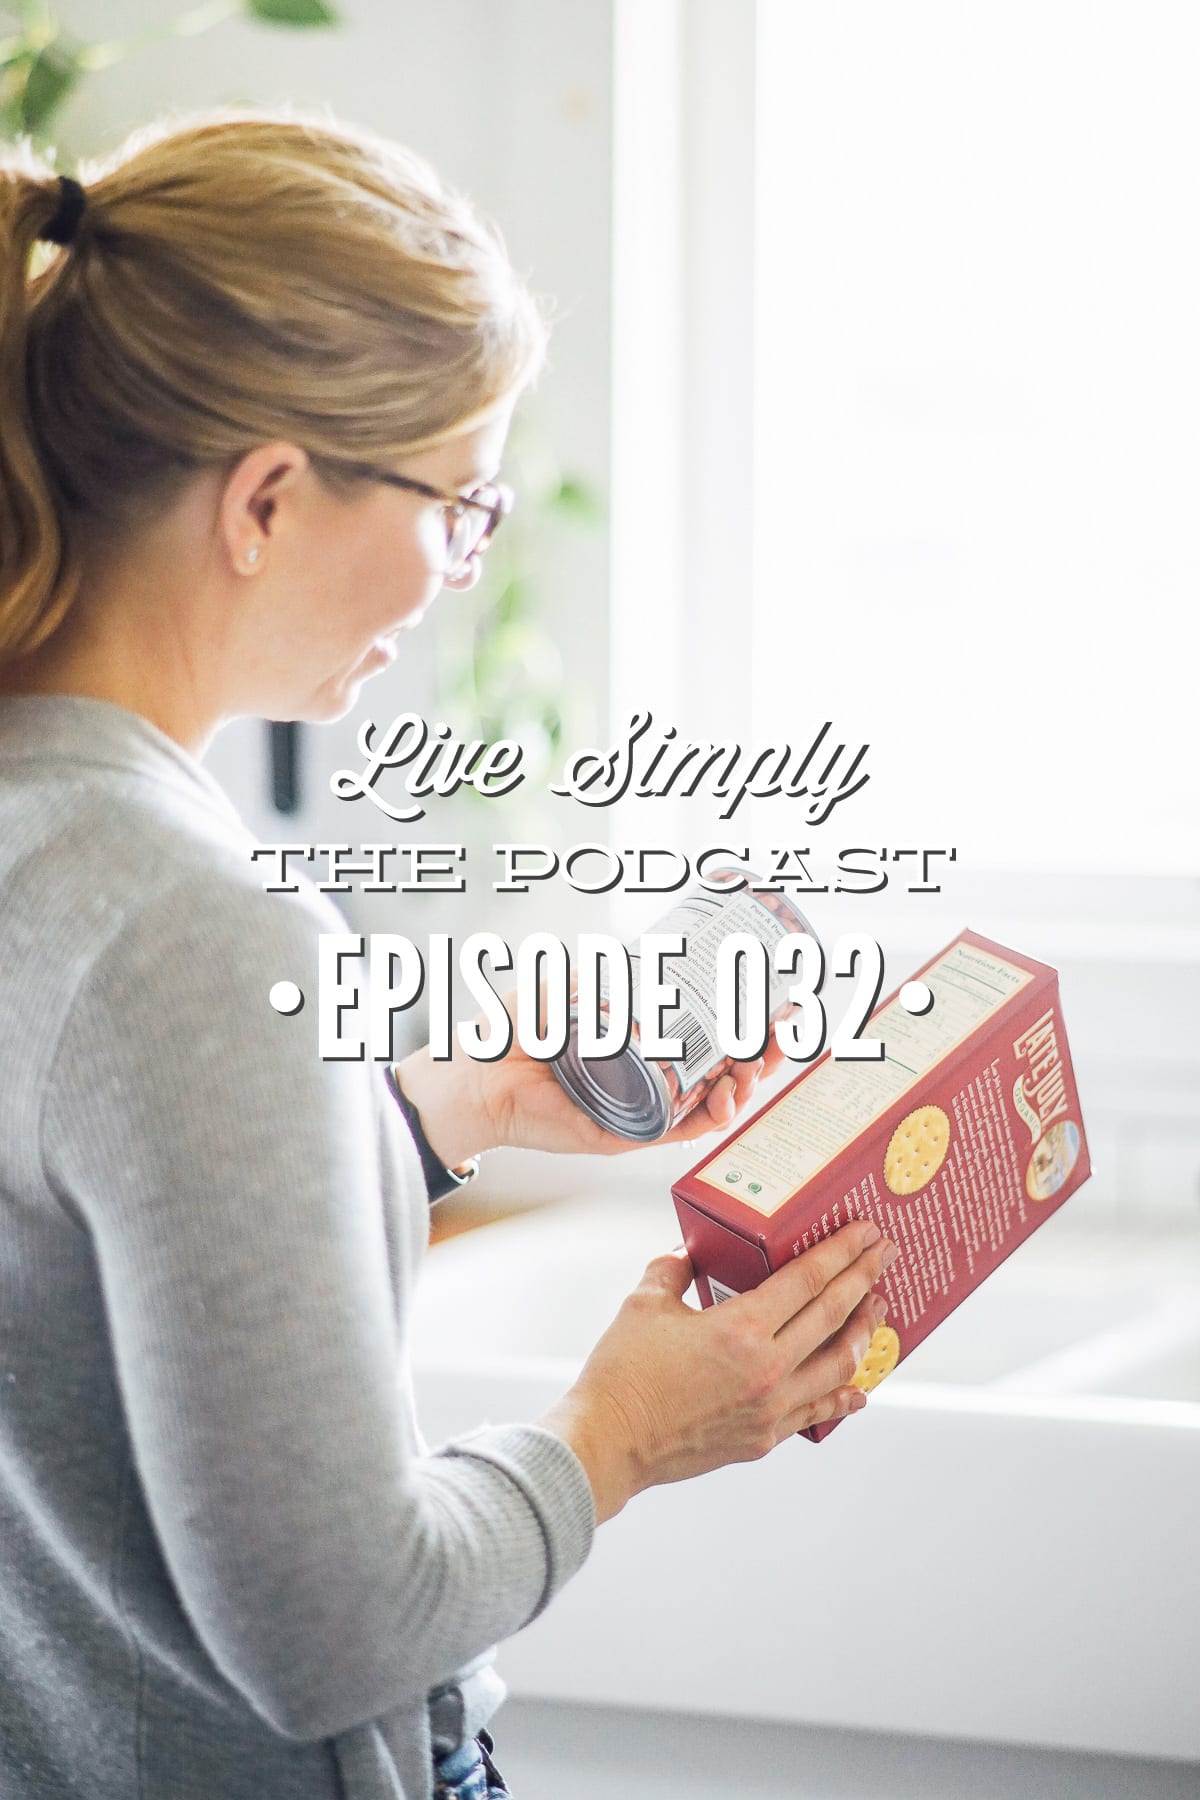 Podcast 032: Discerning the Lies of the Food Industry with Vani Hari from Food Babe